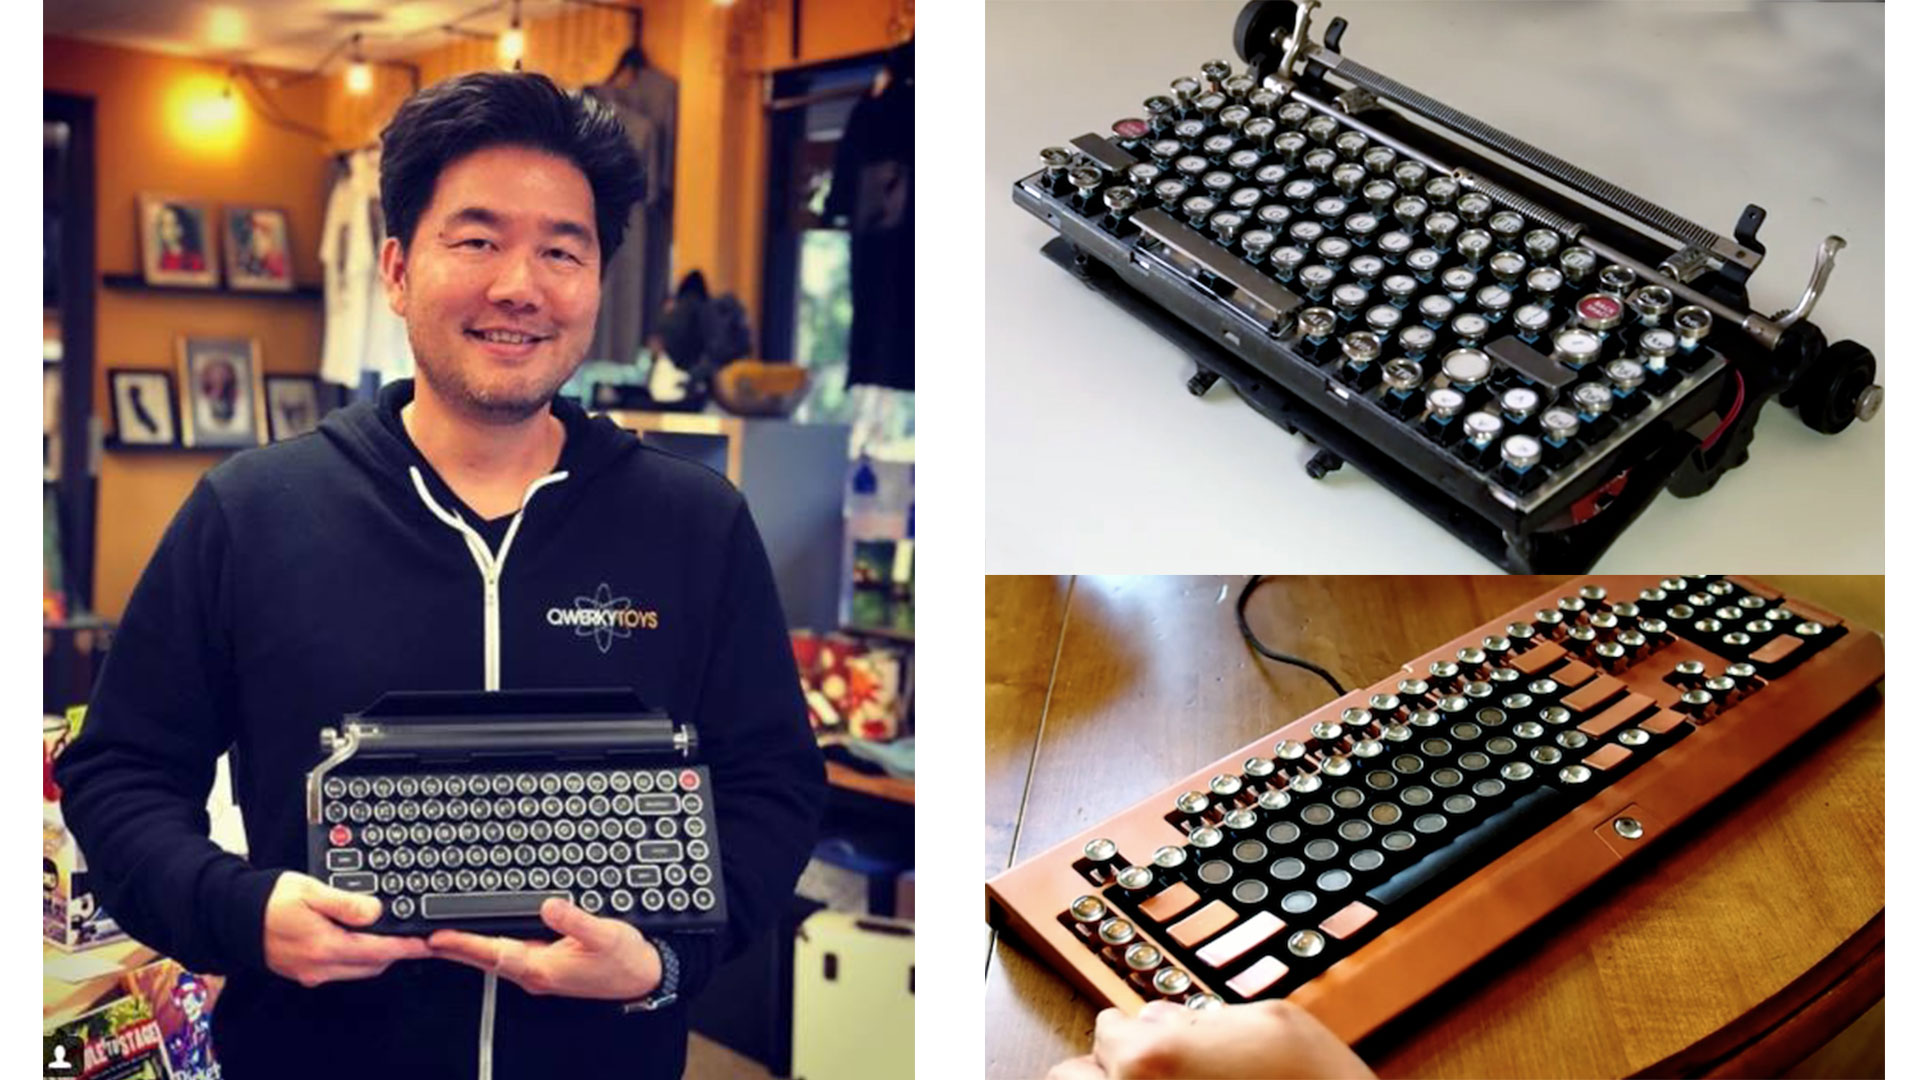 Brian Min and the Qwerkywriter prototype